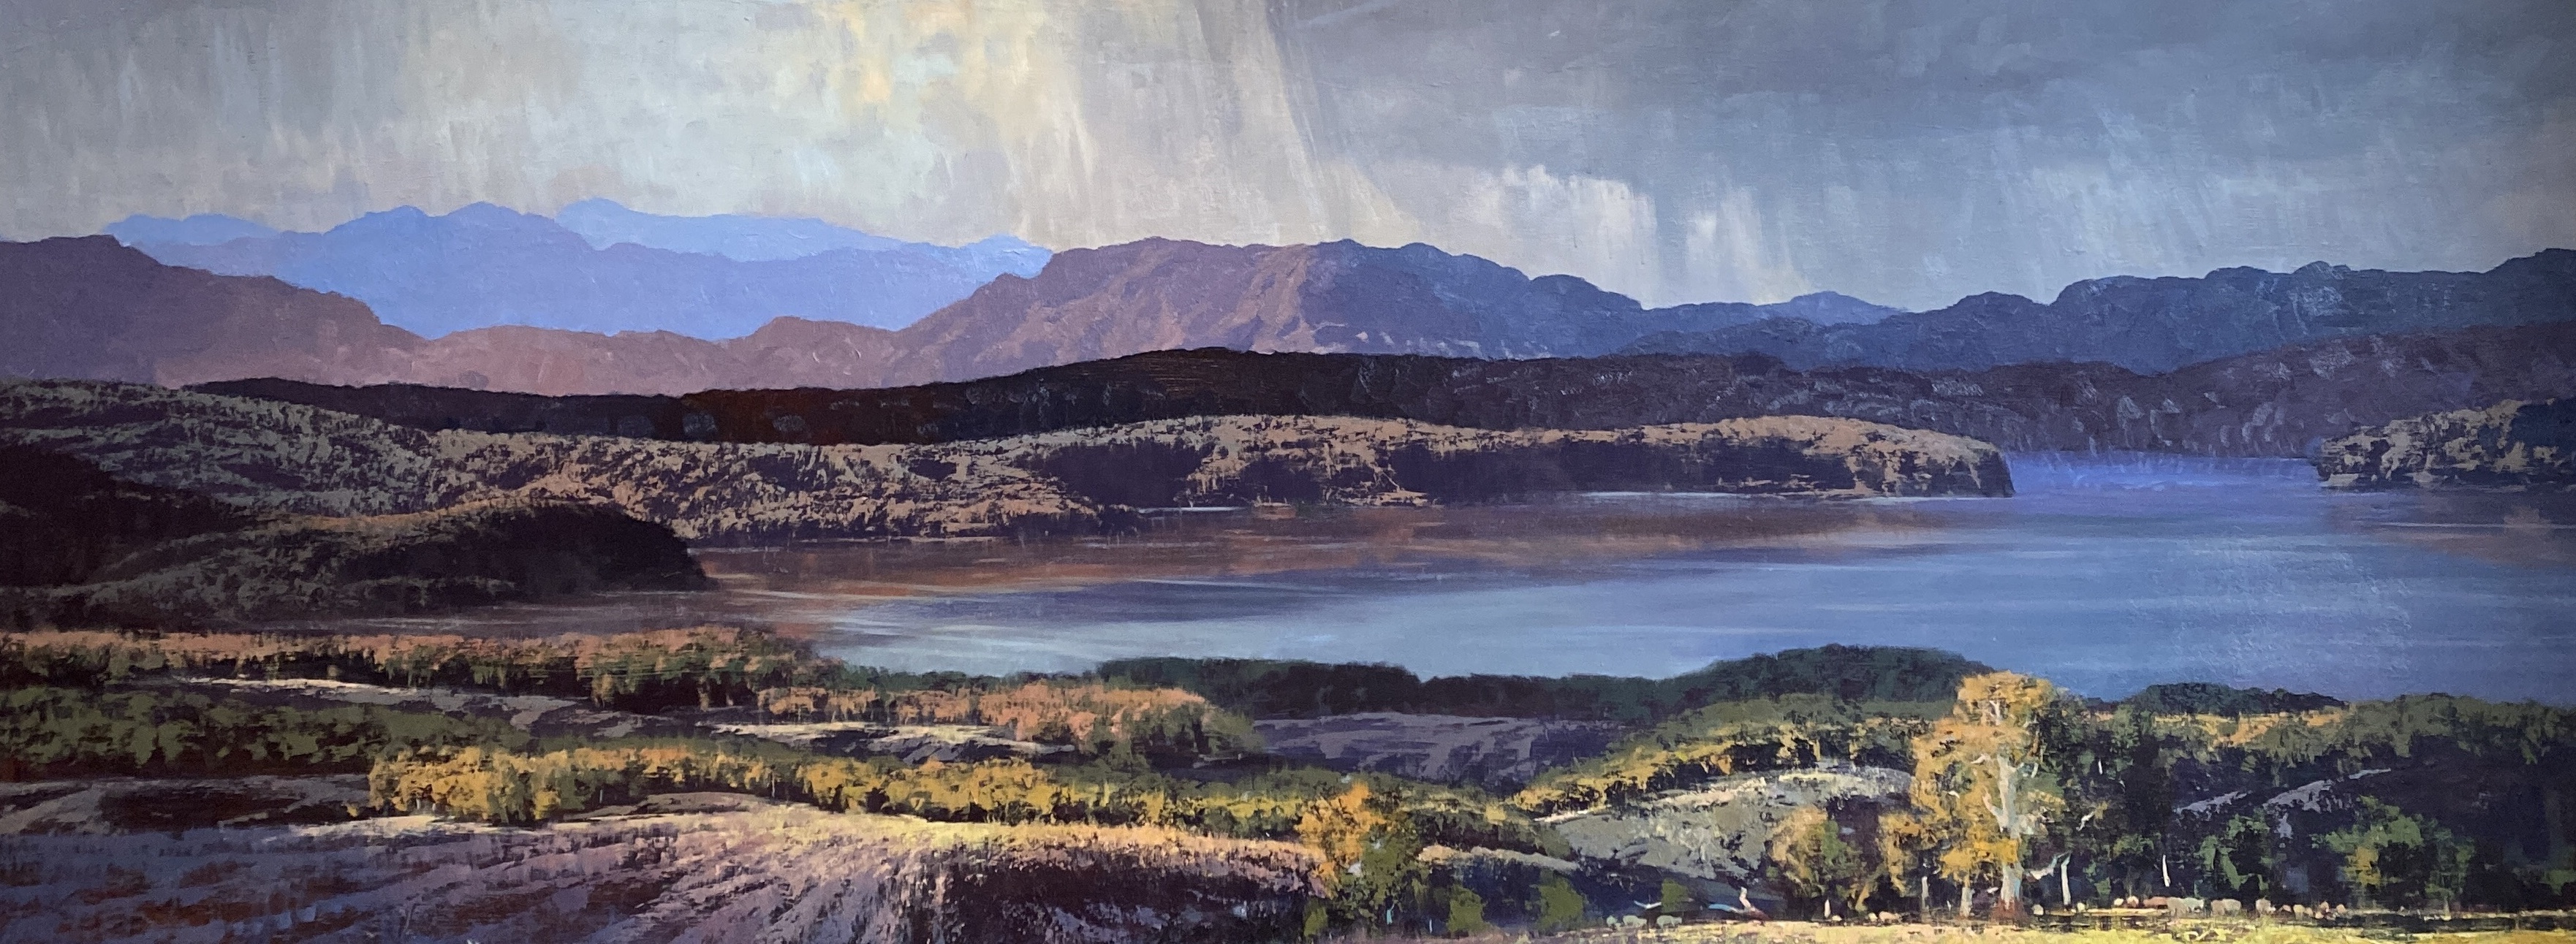 Changing Weather Over The Mountains by Daniel Gibbings-Johns | Lethbridge Landscape Prize 2023 Finalists | Lethbridge Gallery